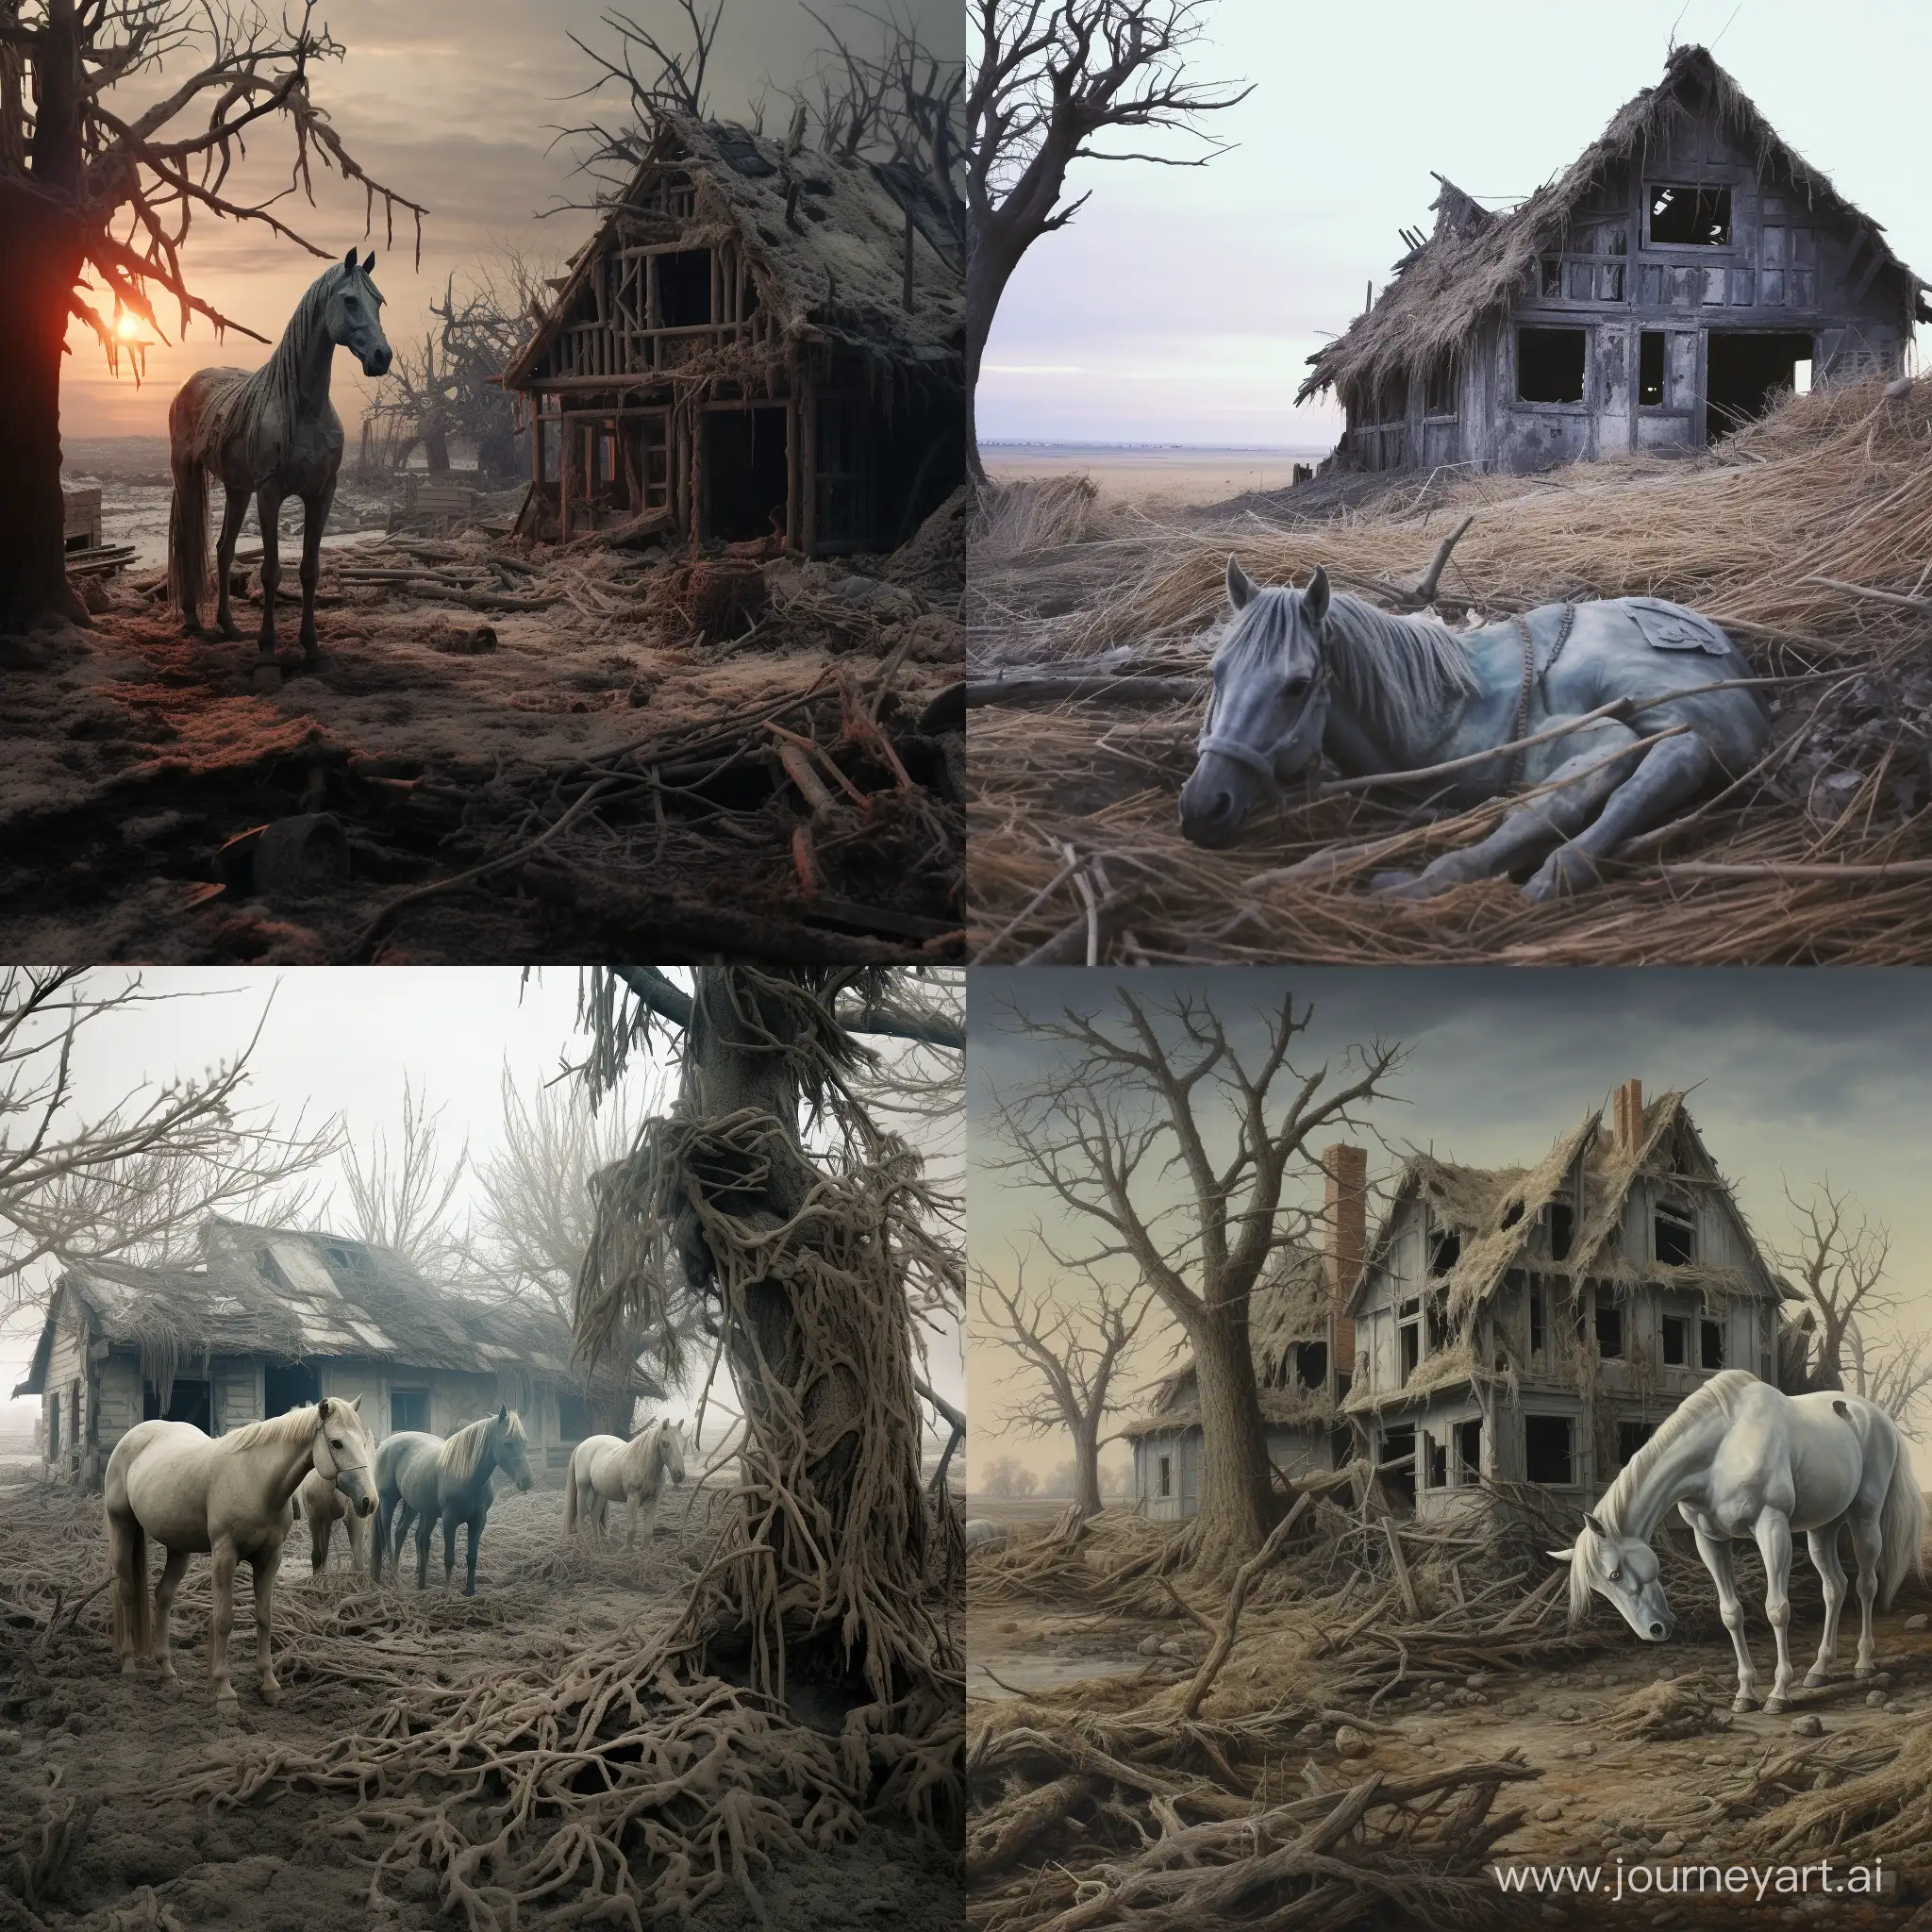 Some horses died in a village. Some house and tree also seen